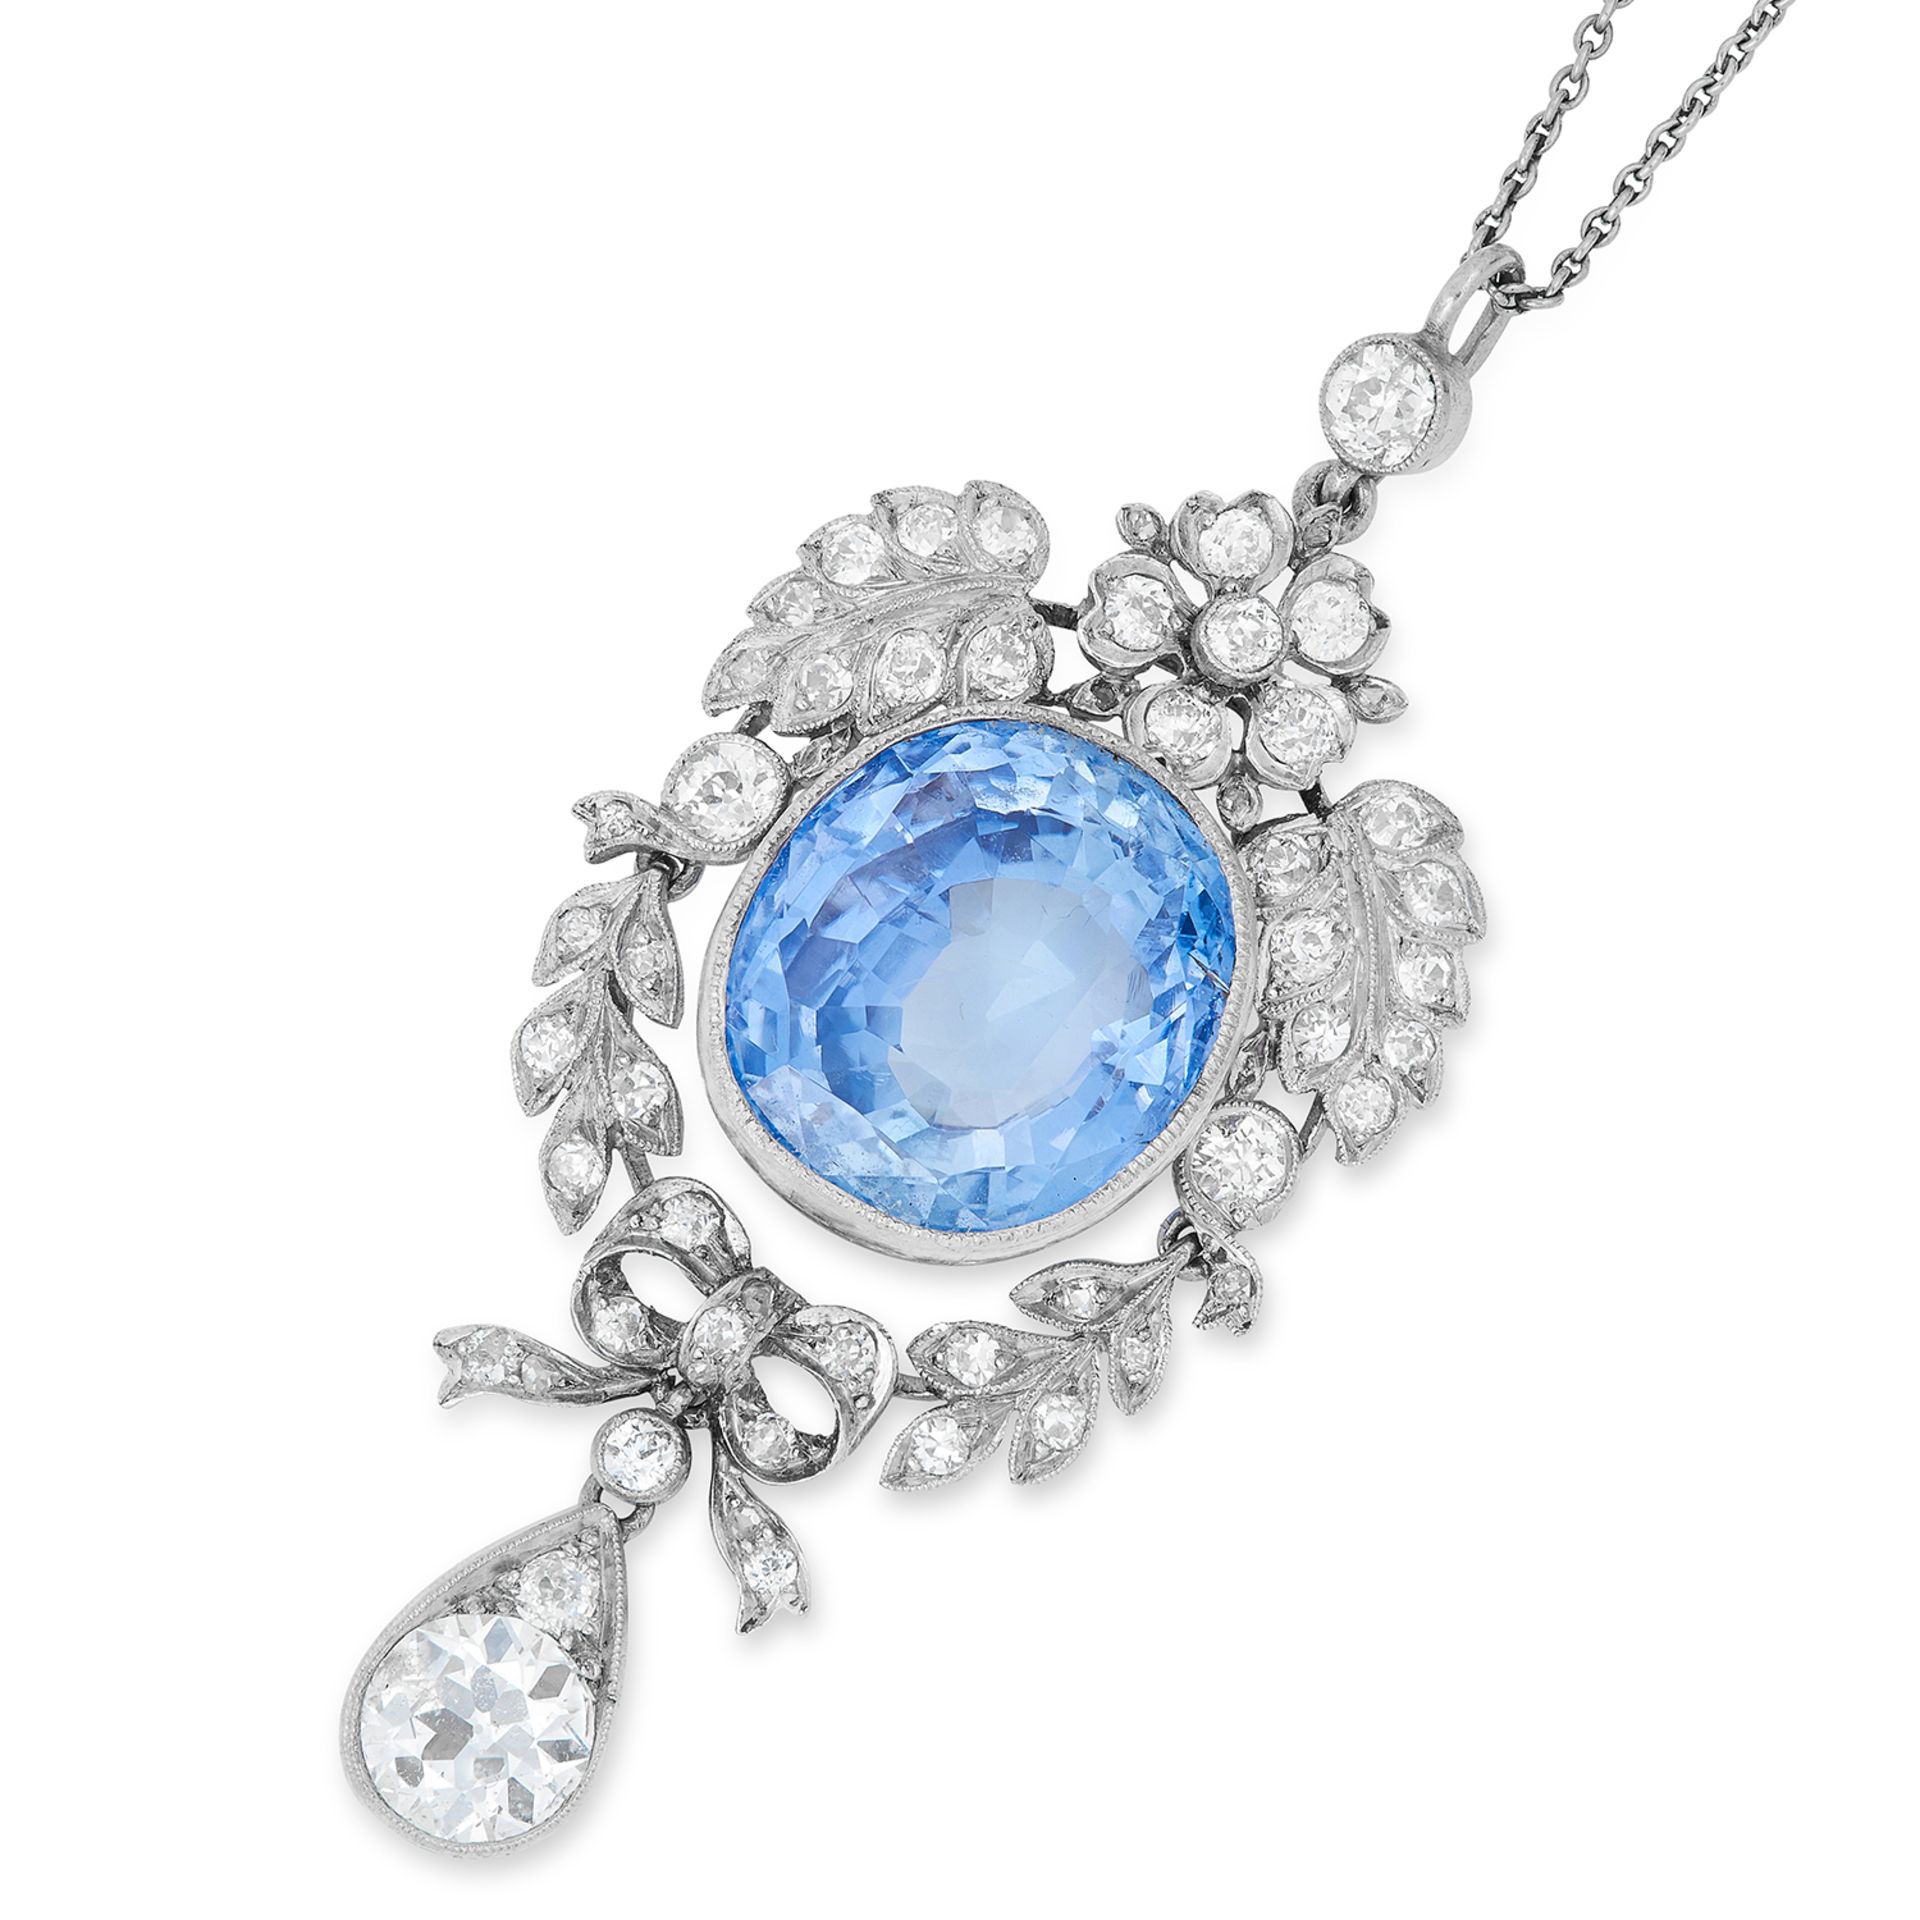 ANTIQUE CEYLON NO HEAT SAPPHIRE AND DIAMOND PENDANT, set with an oval cut sapphire of 18.58 carats